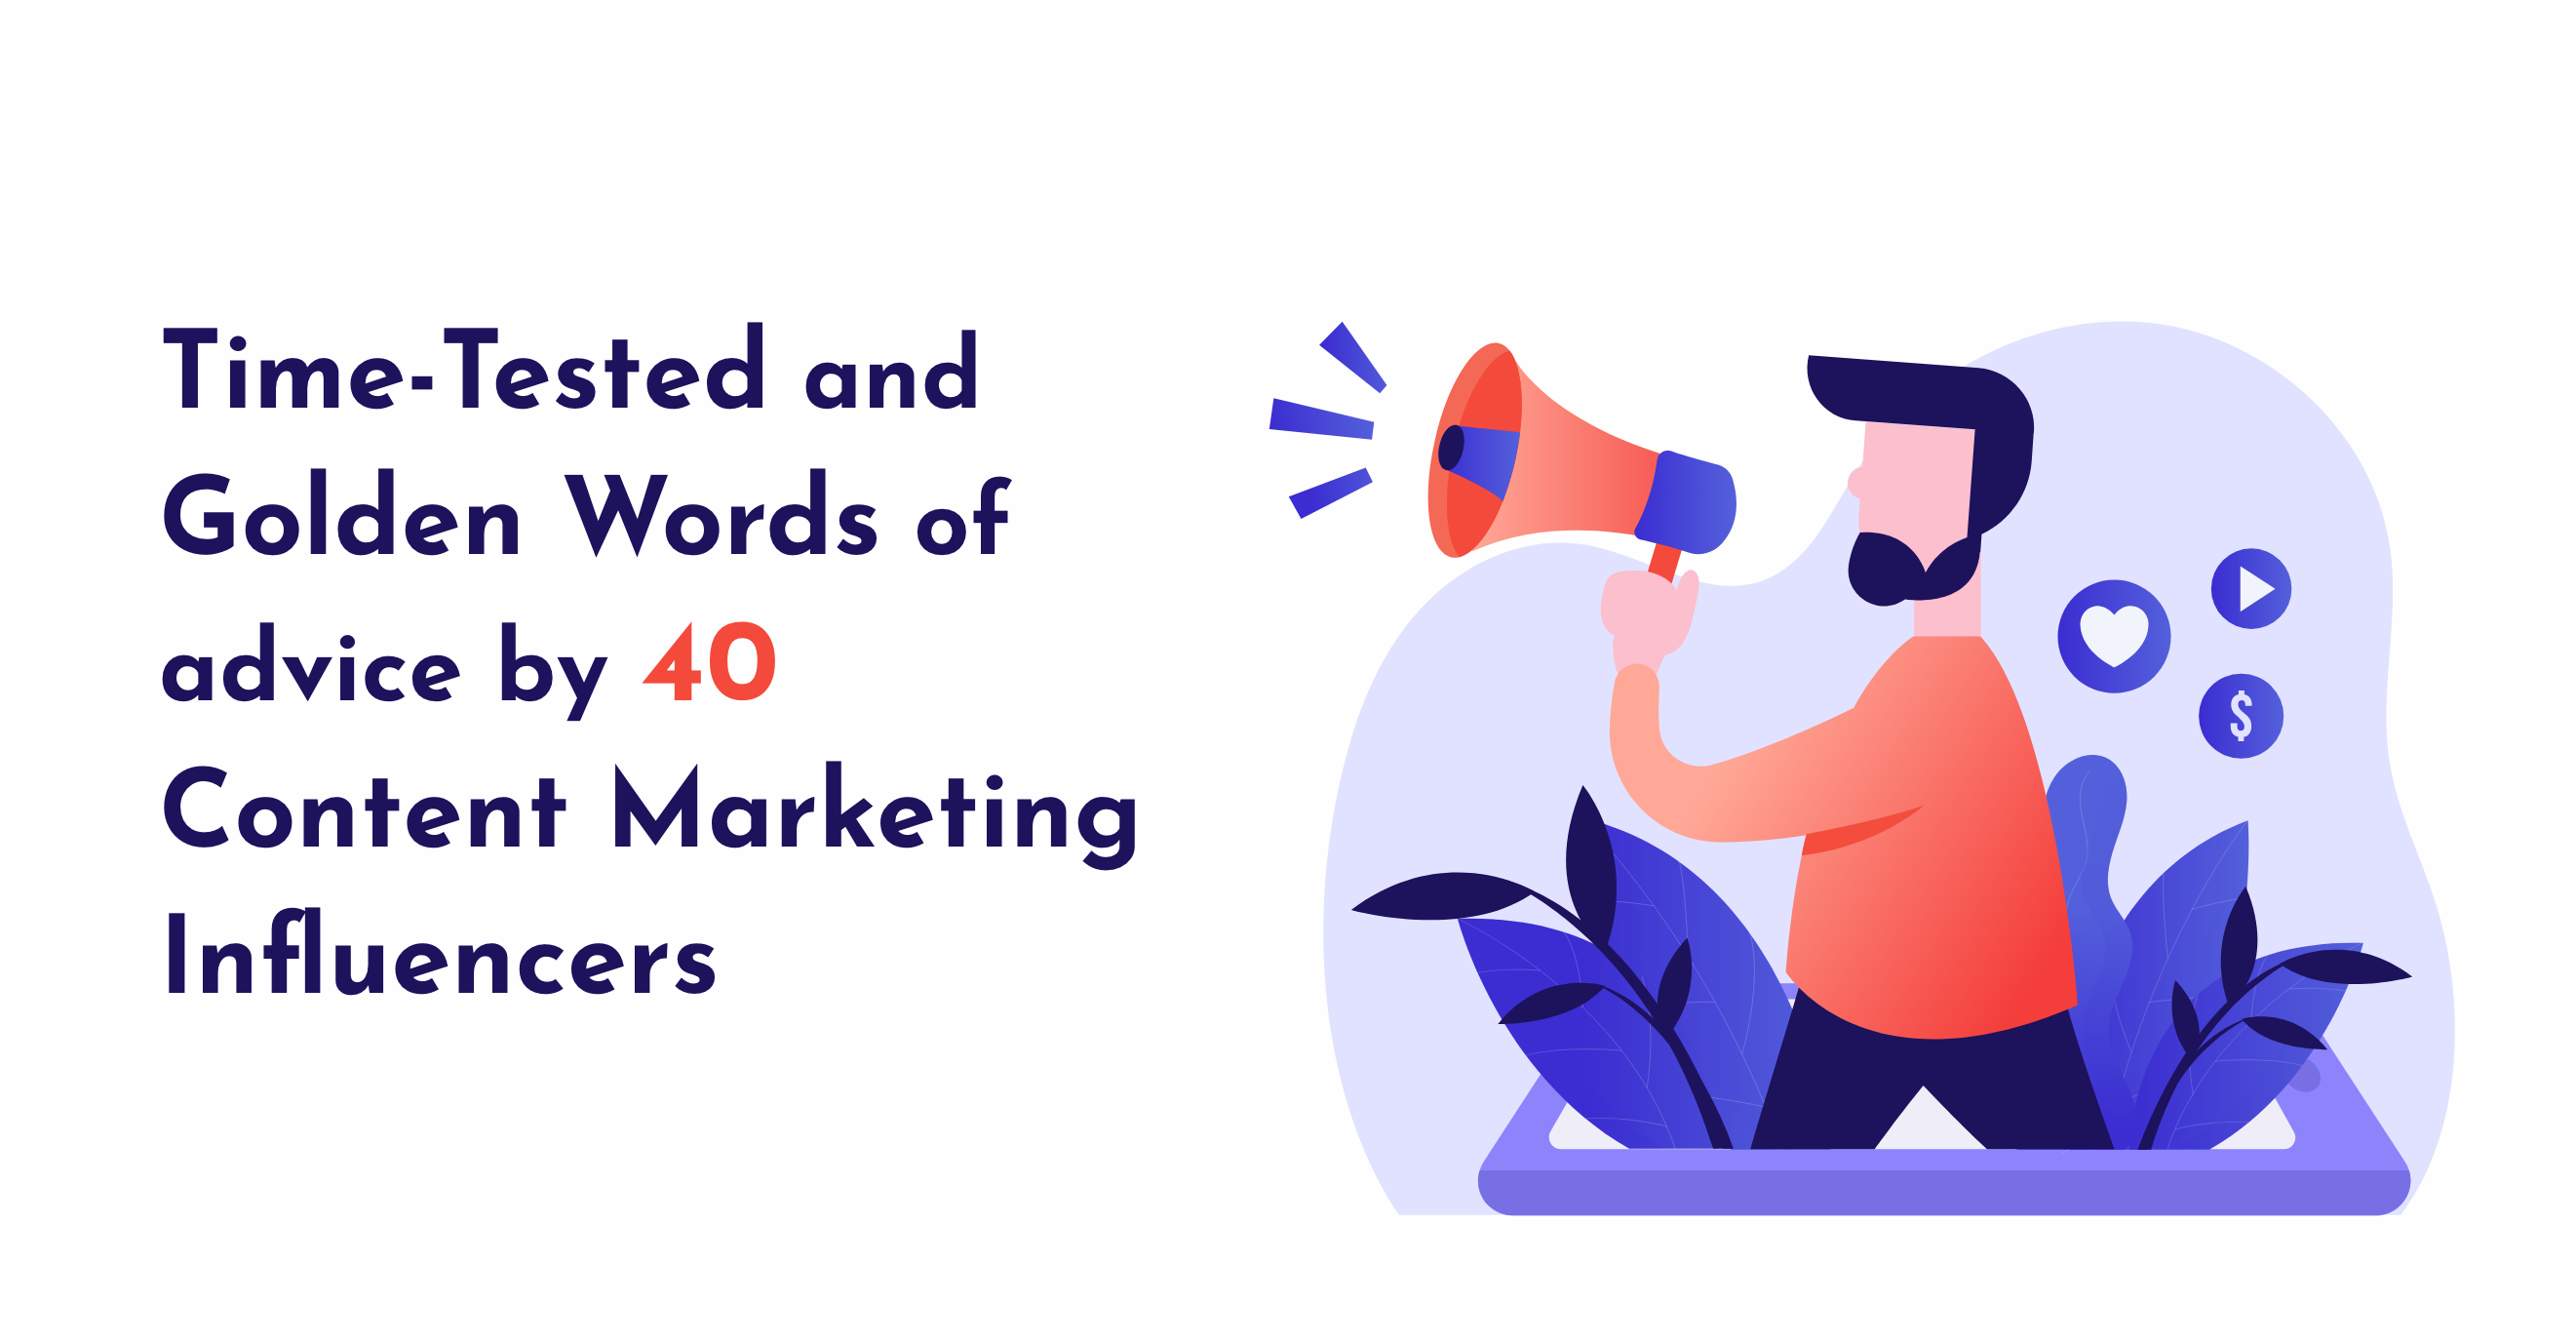 Time-Tested and Golden Words of advice by 40 Content Marketing Influencers